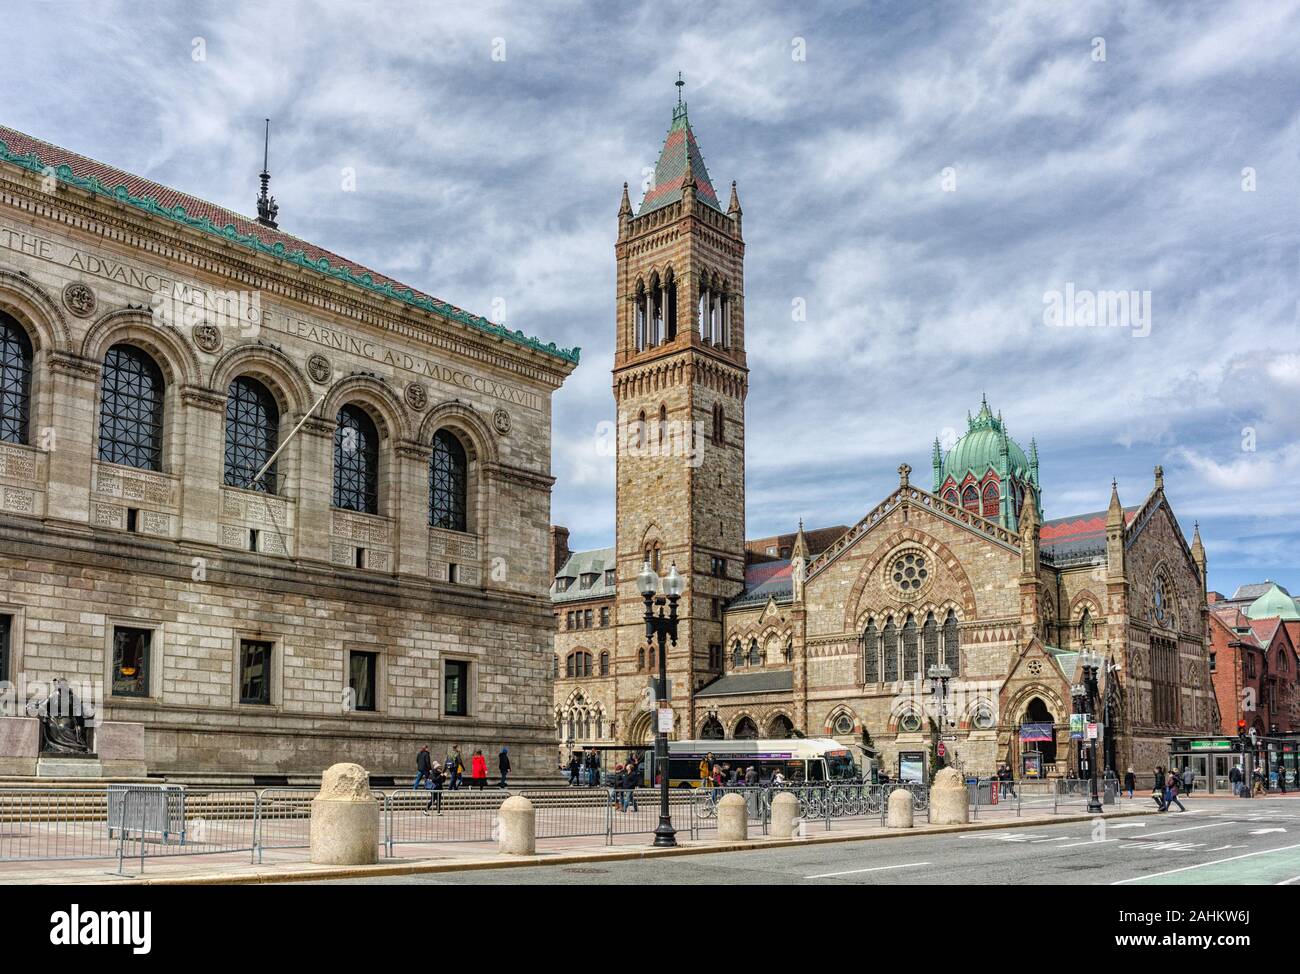 View of the Boston Public Library and the Old South Church in Copley Square in Boston, Massachusetts. Stock Photo